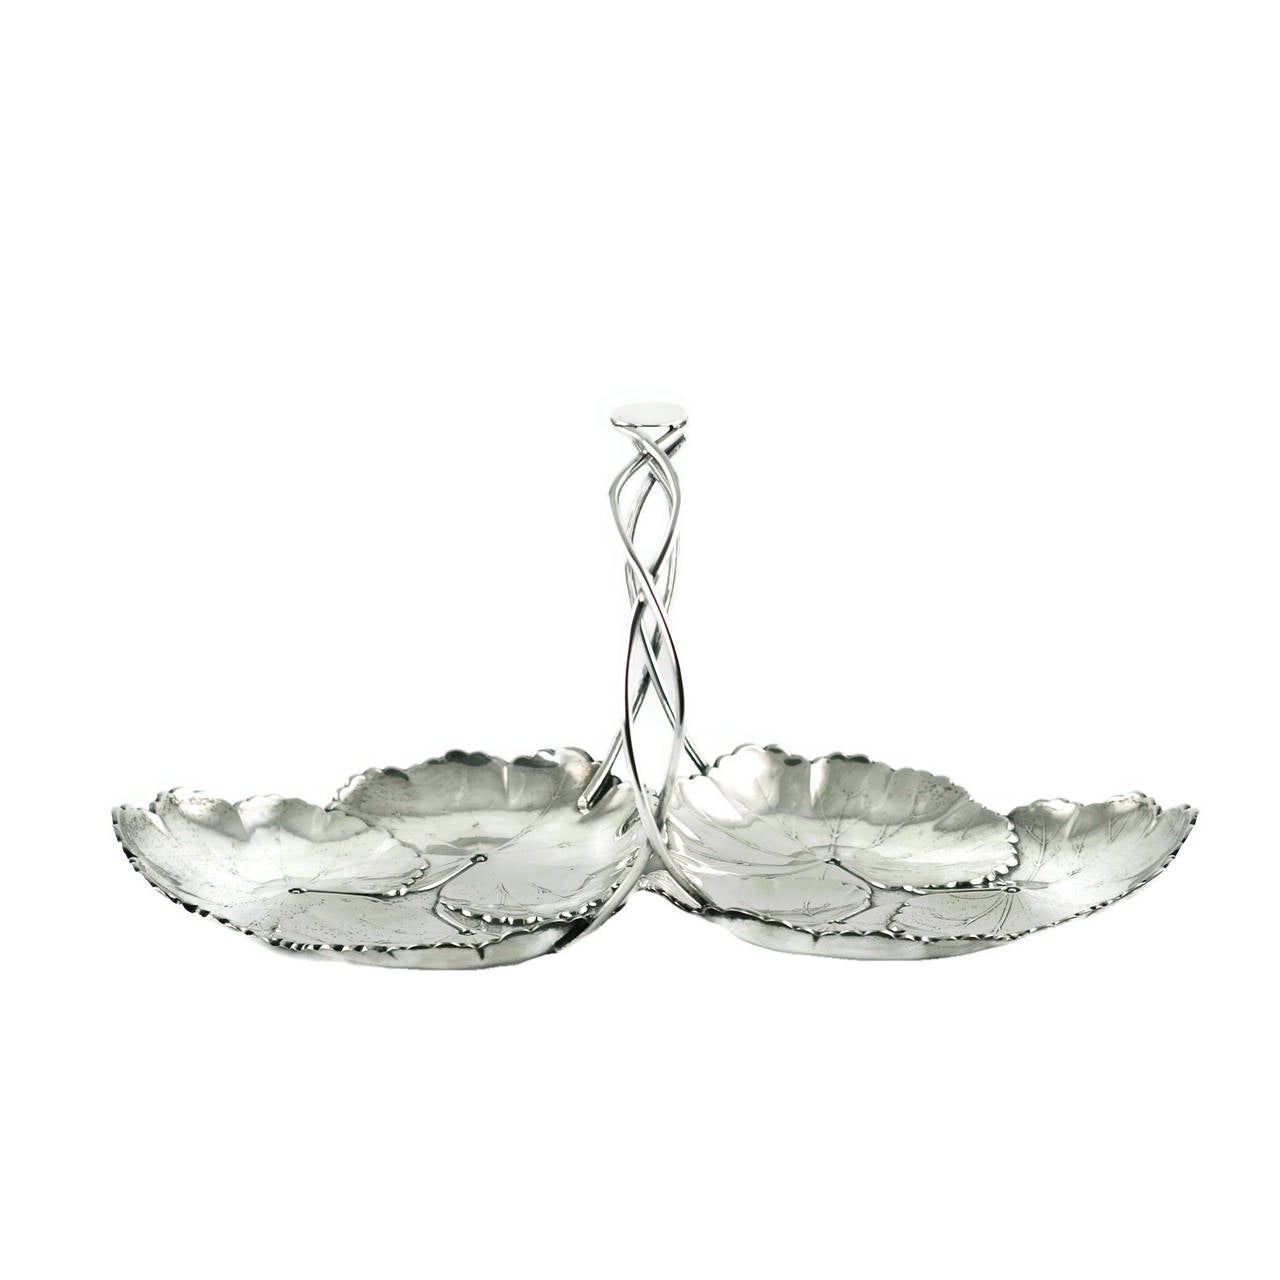 Art Nouveau Reed and Barton Sterling Silver Two-Part Lily Pad Dish with Intertwined Handle